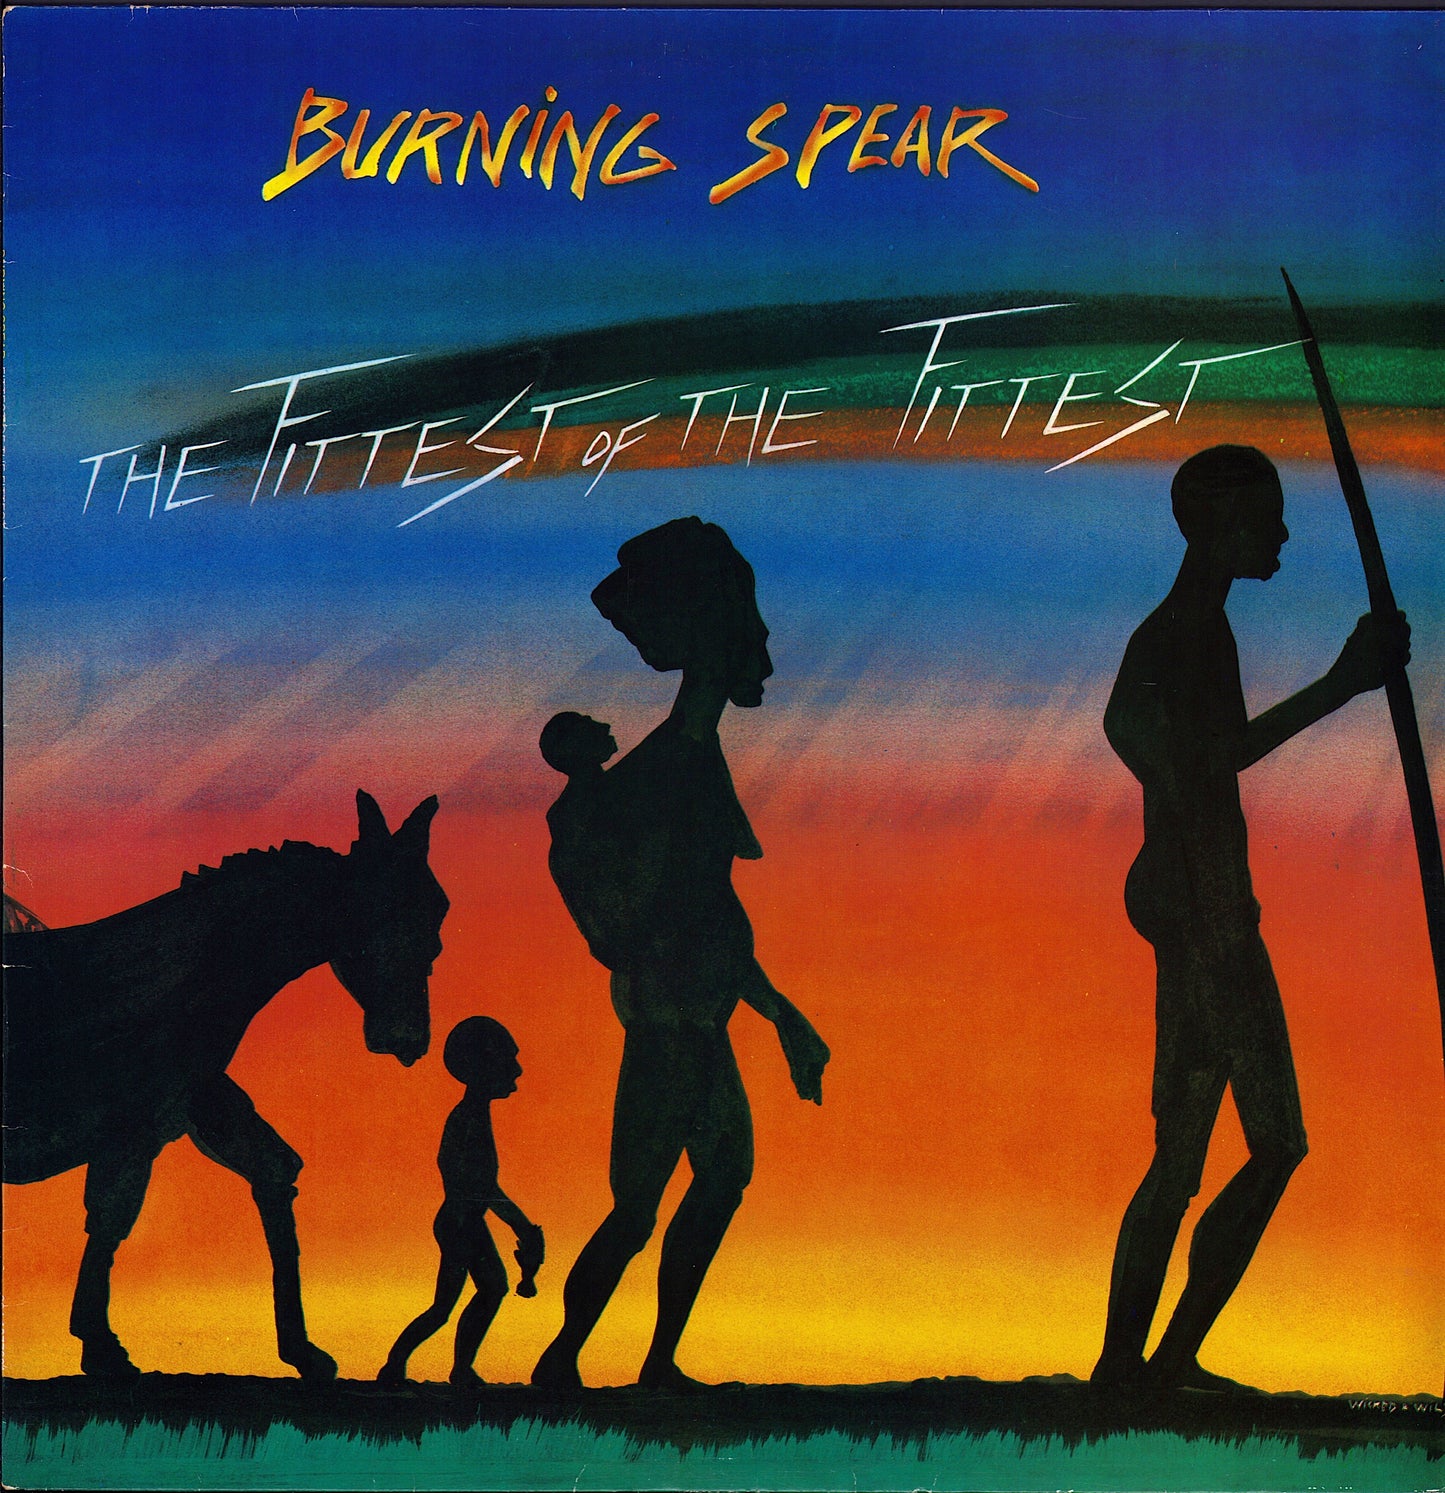 Burning Spear - The Fittest Of The Fittest Vinyl LP